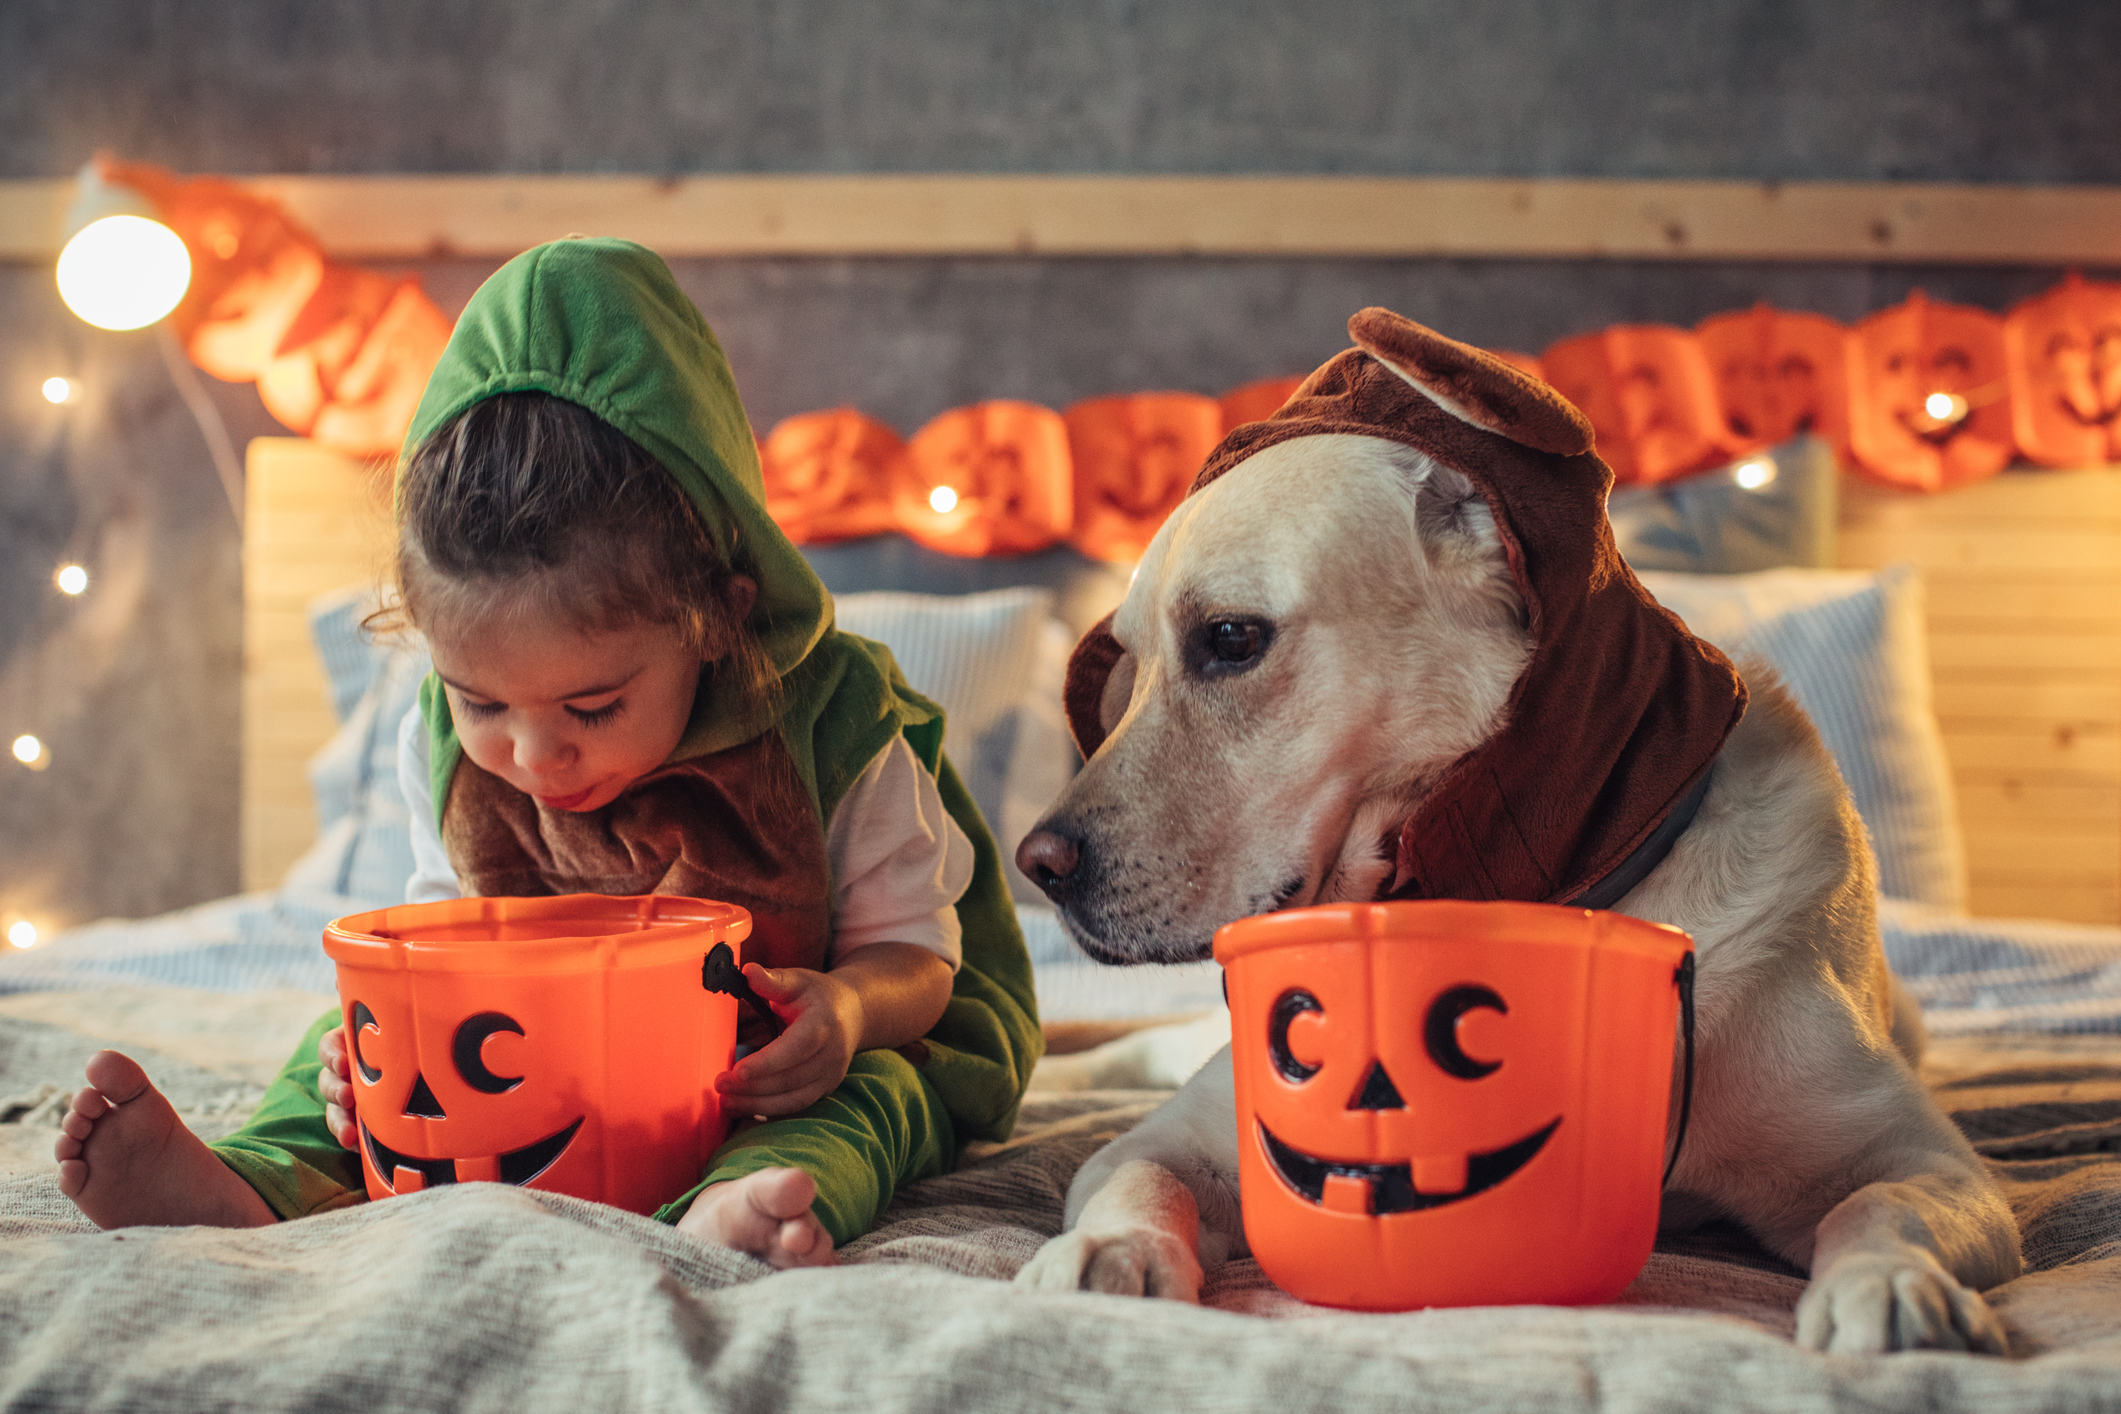 Little girl and his dog in costumes on bed celebrating Halloween